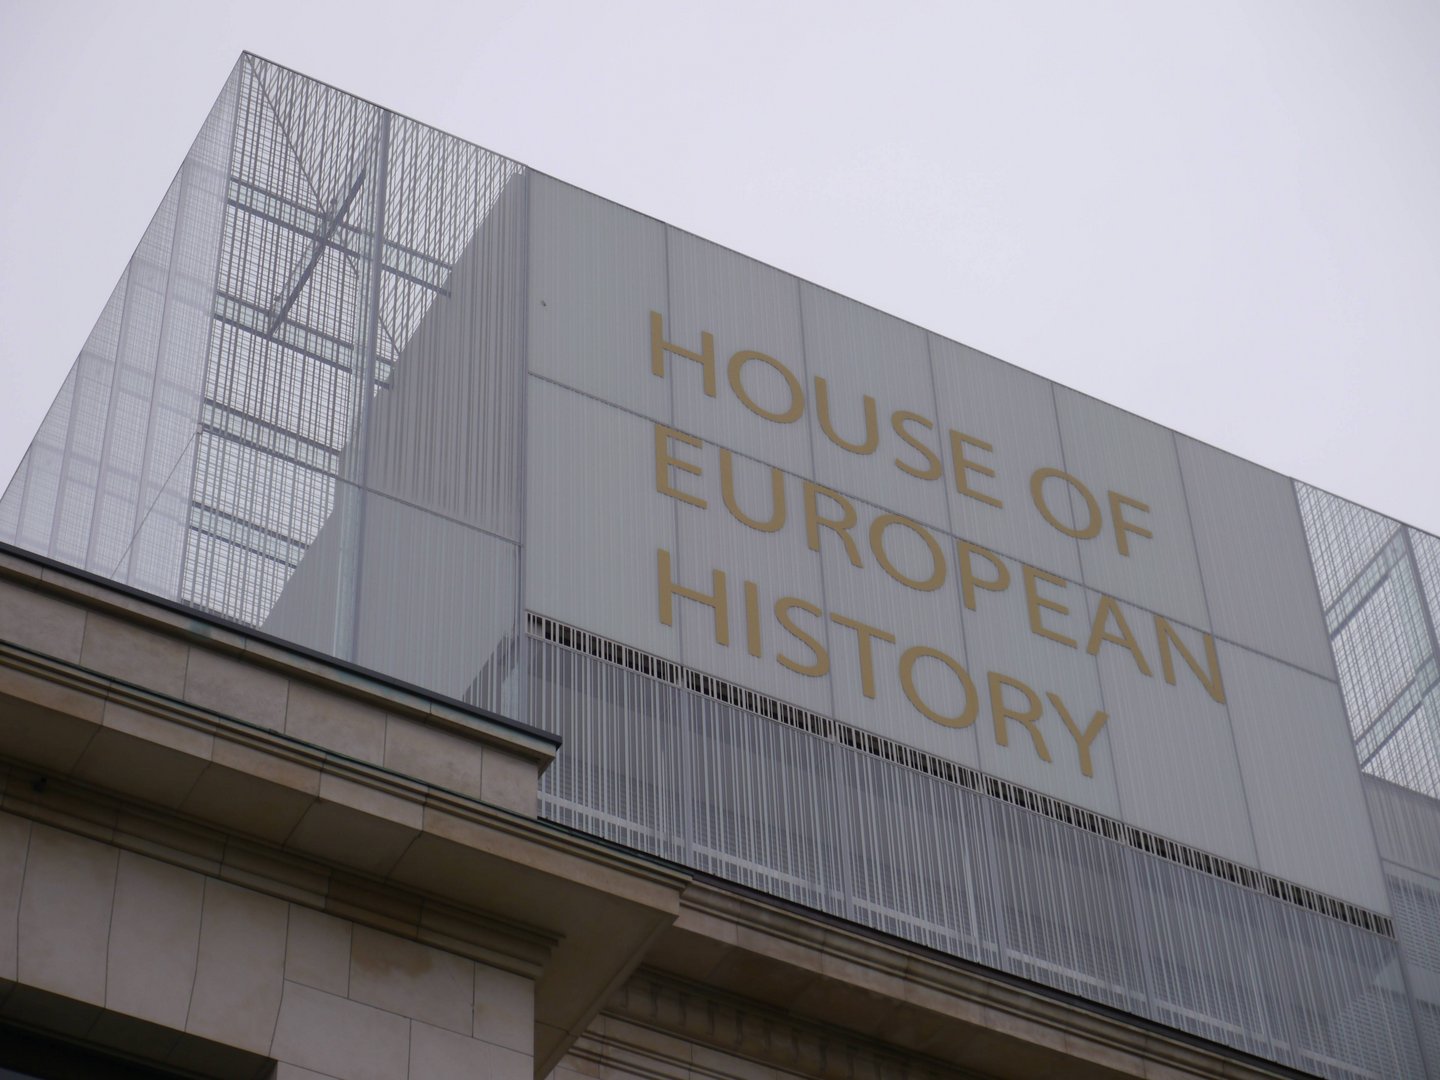 Building of The House of European History from outside. The name is on the building in big golden letters